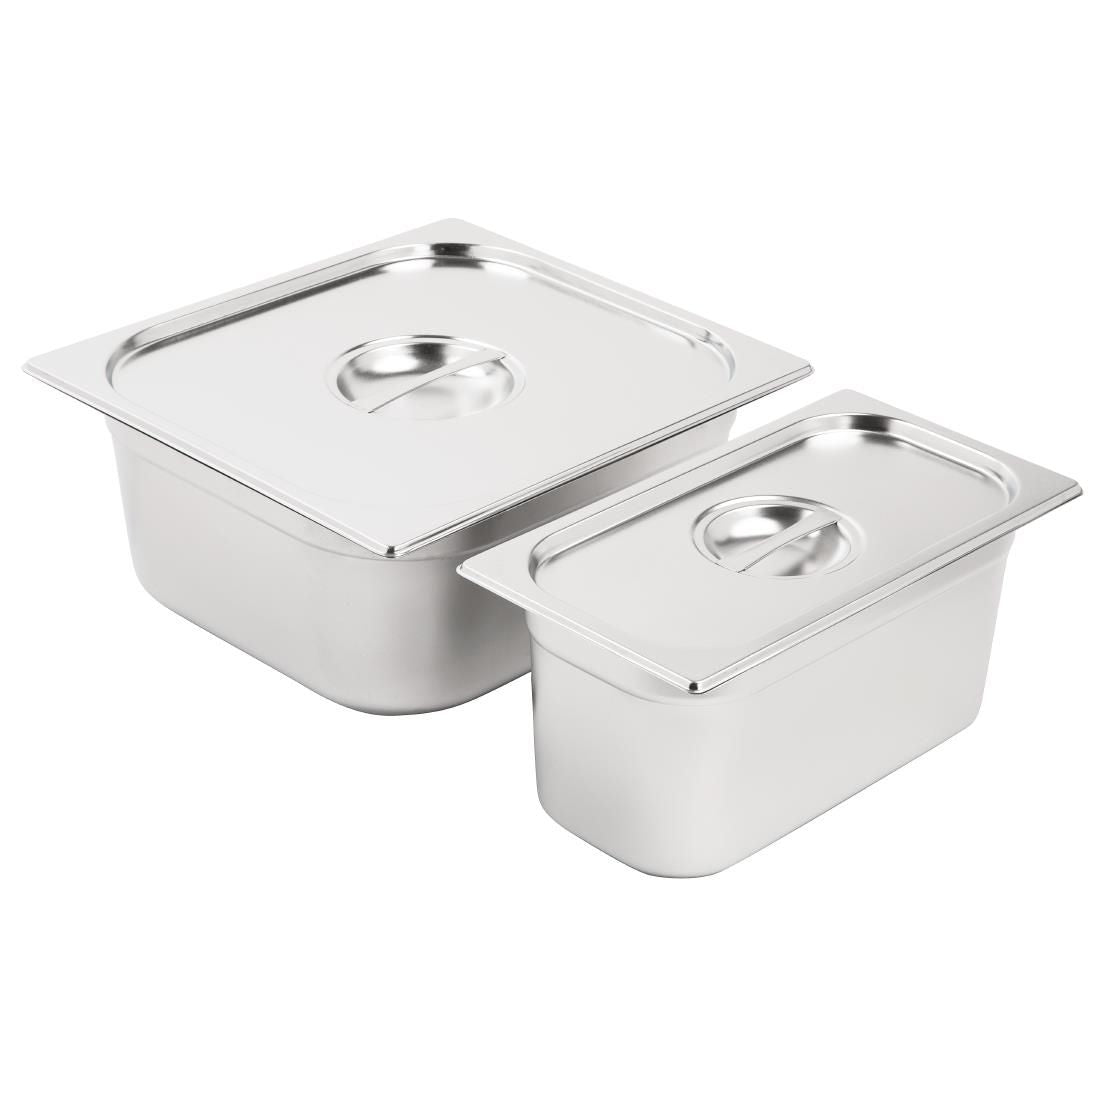 SA240 Vogue Stainless Steel Gastronorm Pan Set 1/3 and 2/3 with Lids